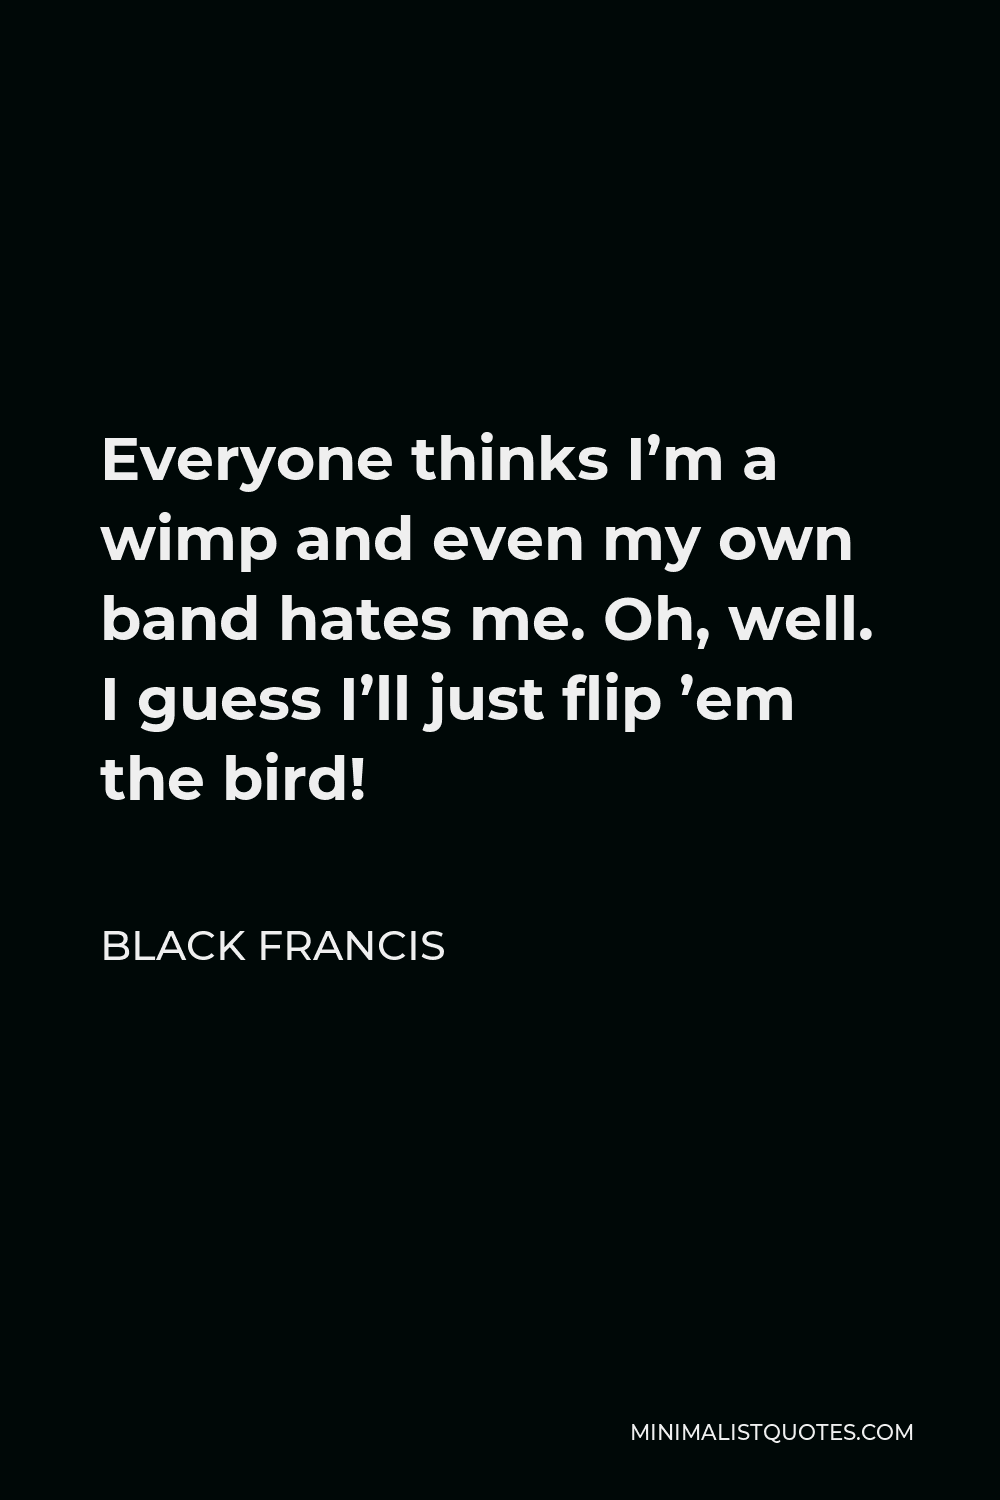 Black Francis Quote - Everyone thinks I’m a wimp and even my own band hates me. Oh, well. I guess I’ll just flip ’em the bird!